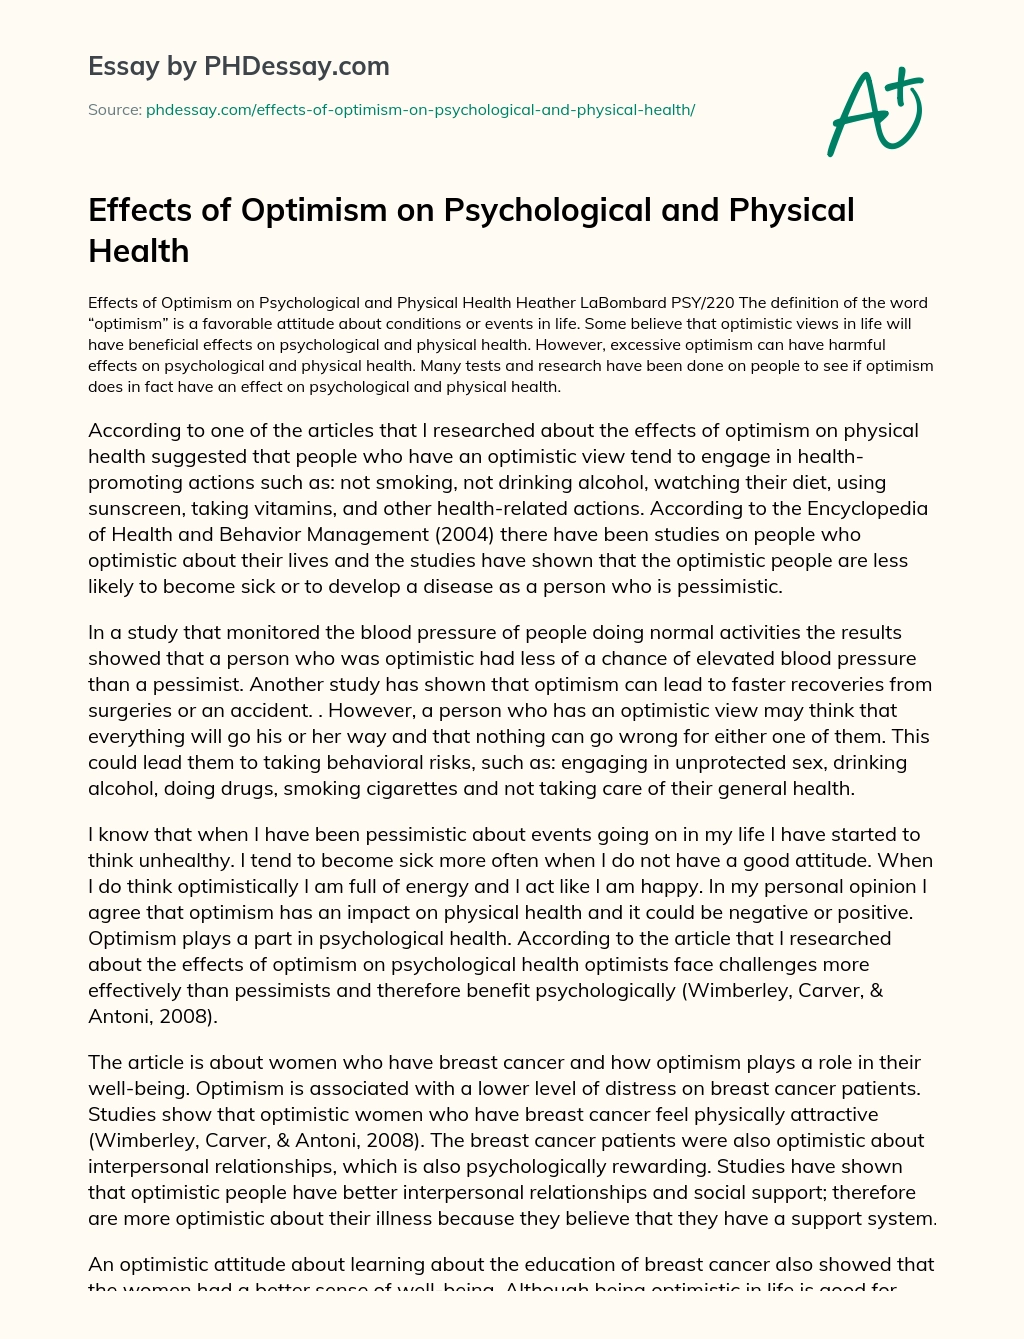 Effects of Optimism on Psychological and Physical Health essay